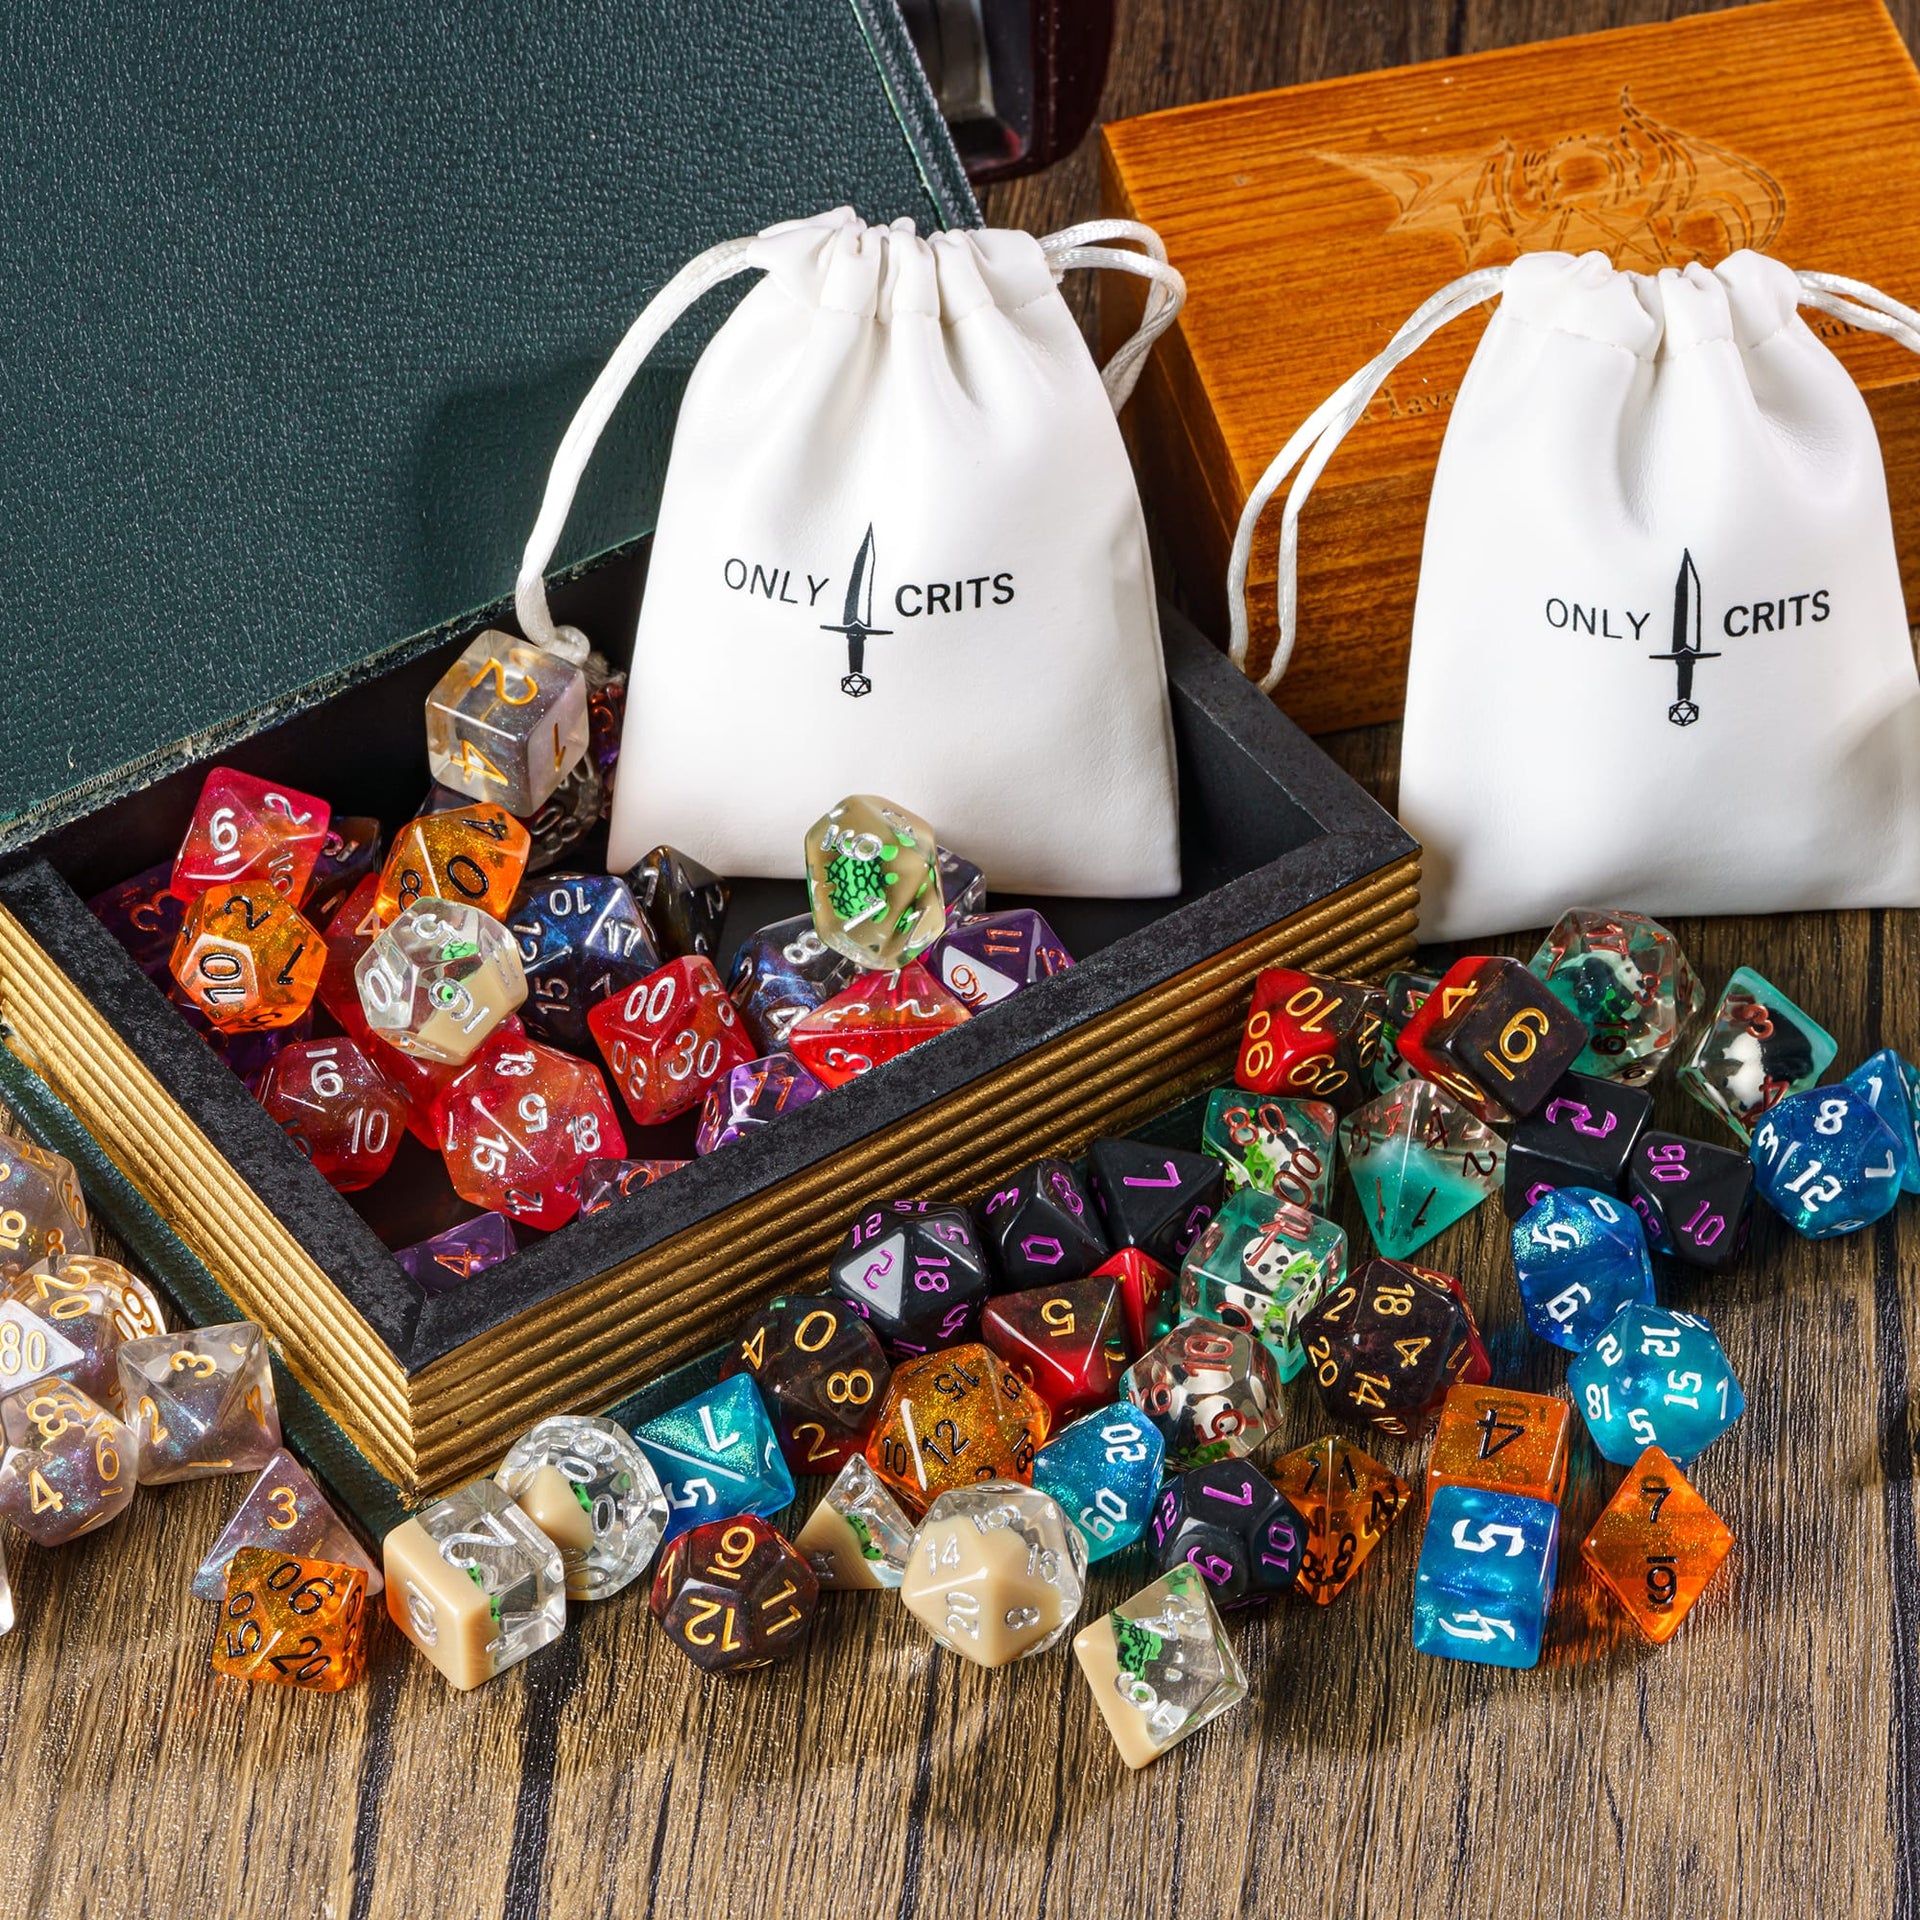 Friday The 13Th D6 Dice Set (6)